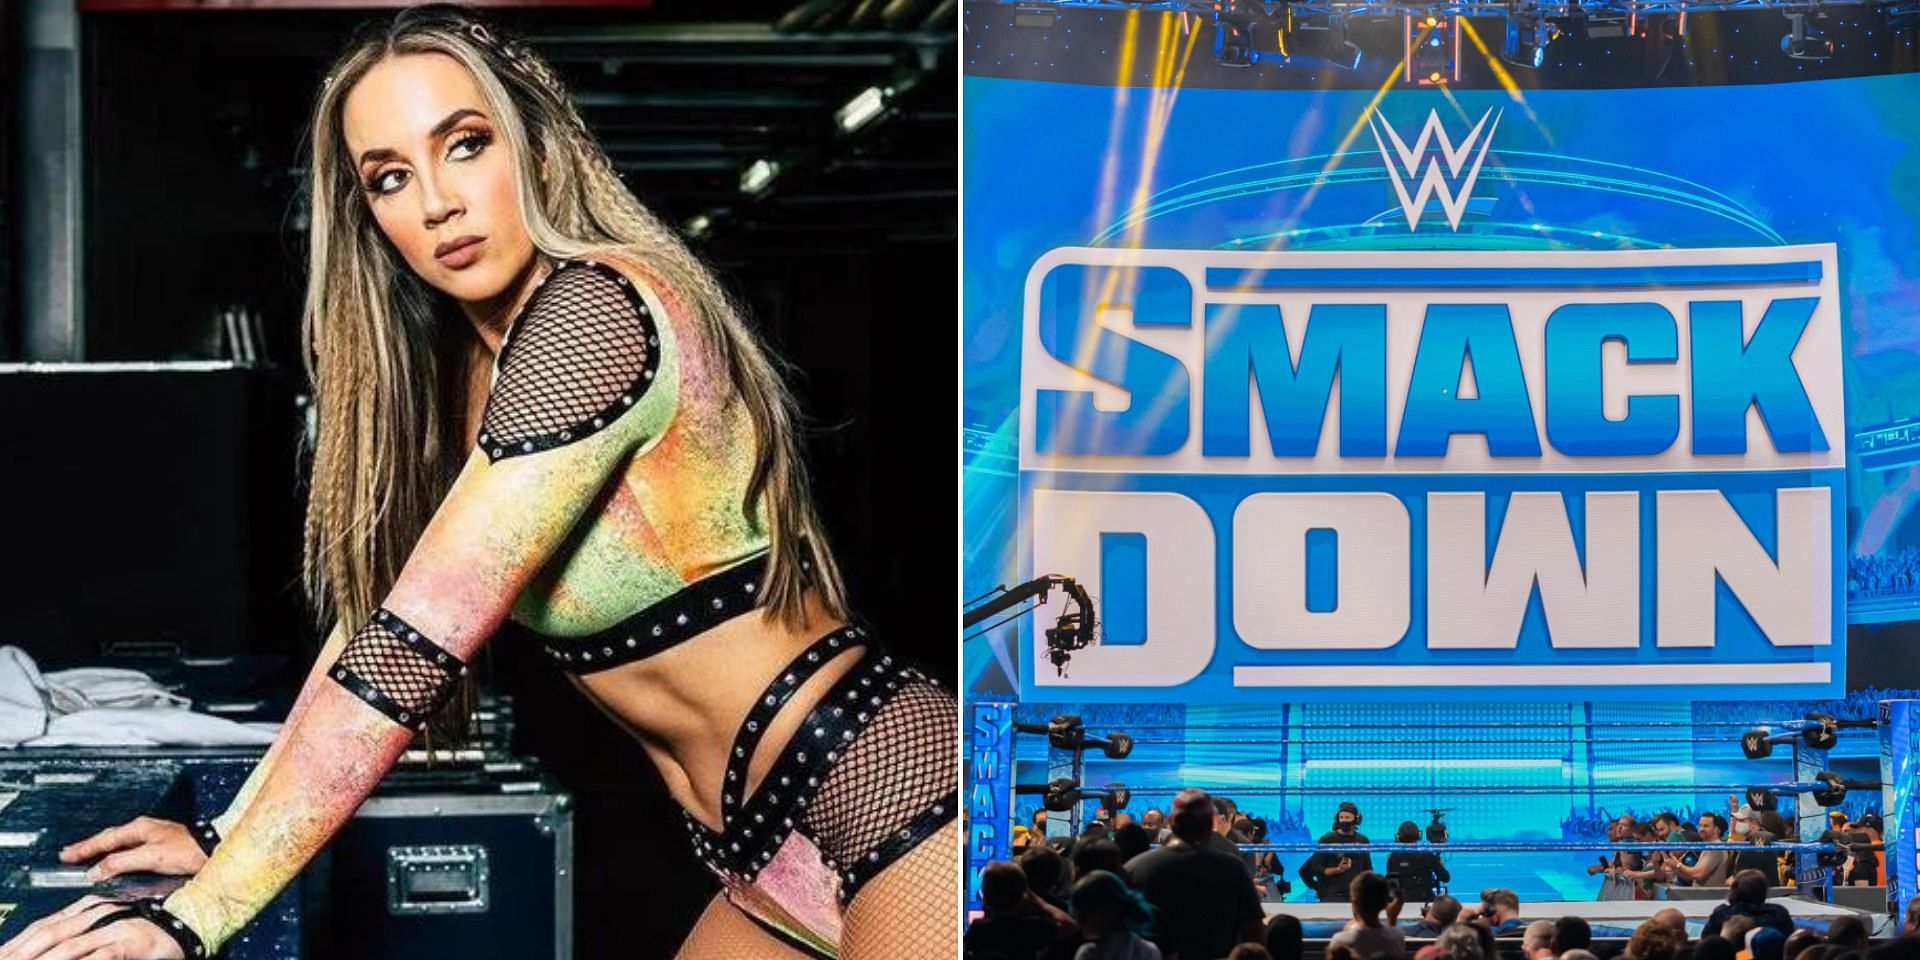 Chelsea Green will compete in a title match on SmackDown